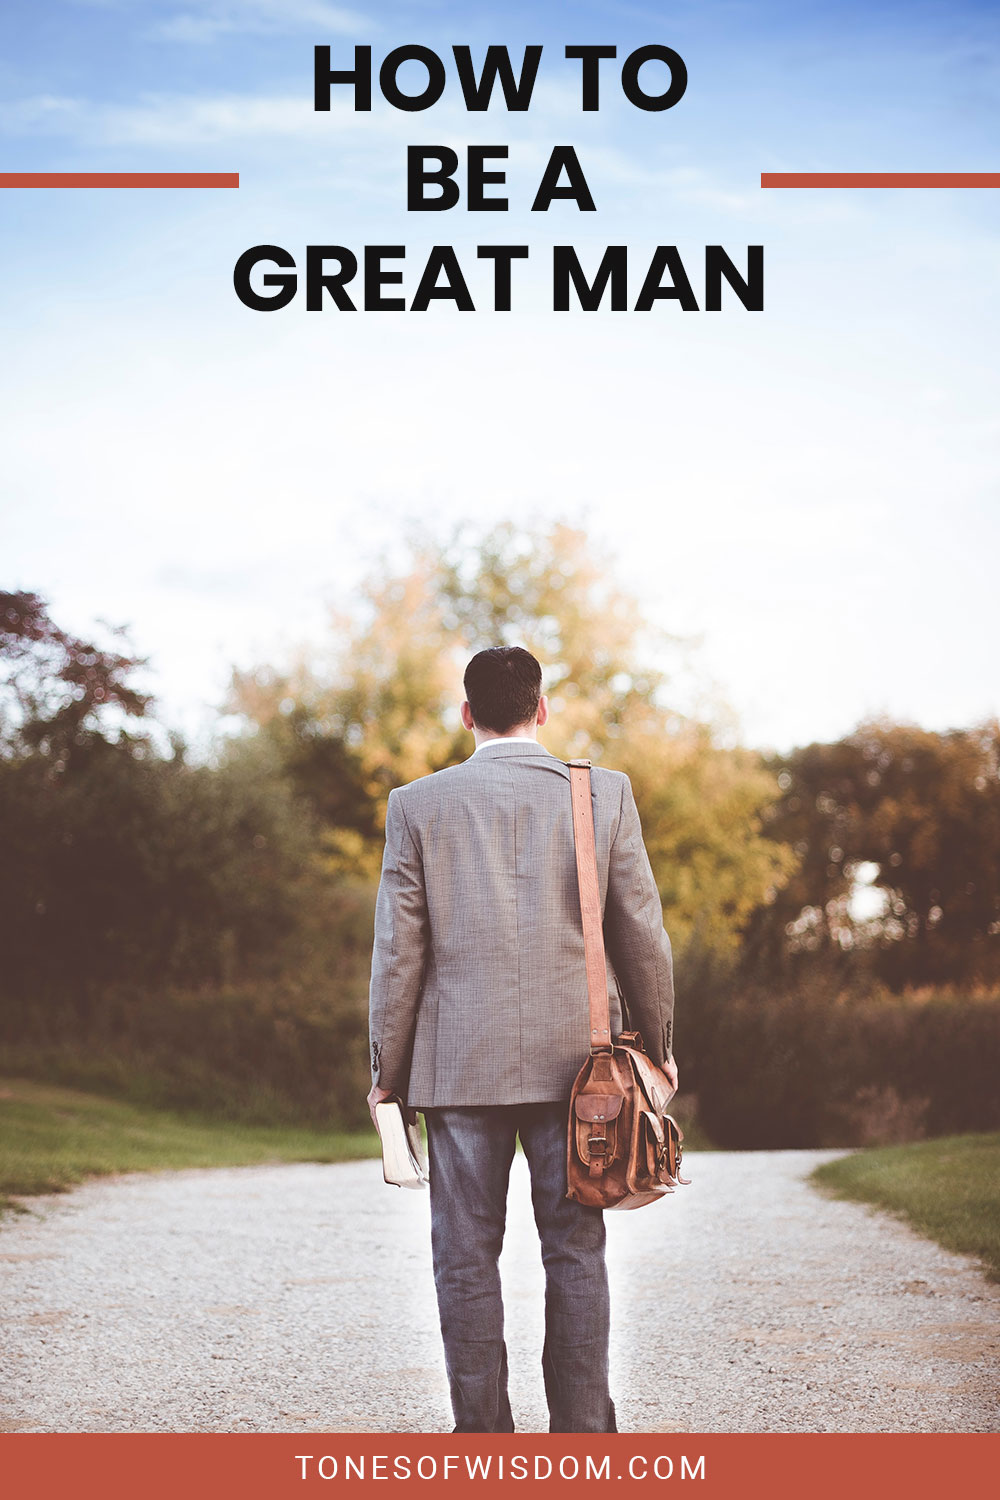 How To Be a Great Man